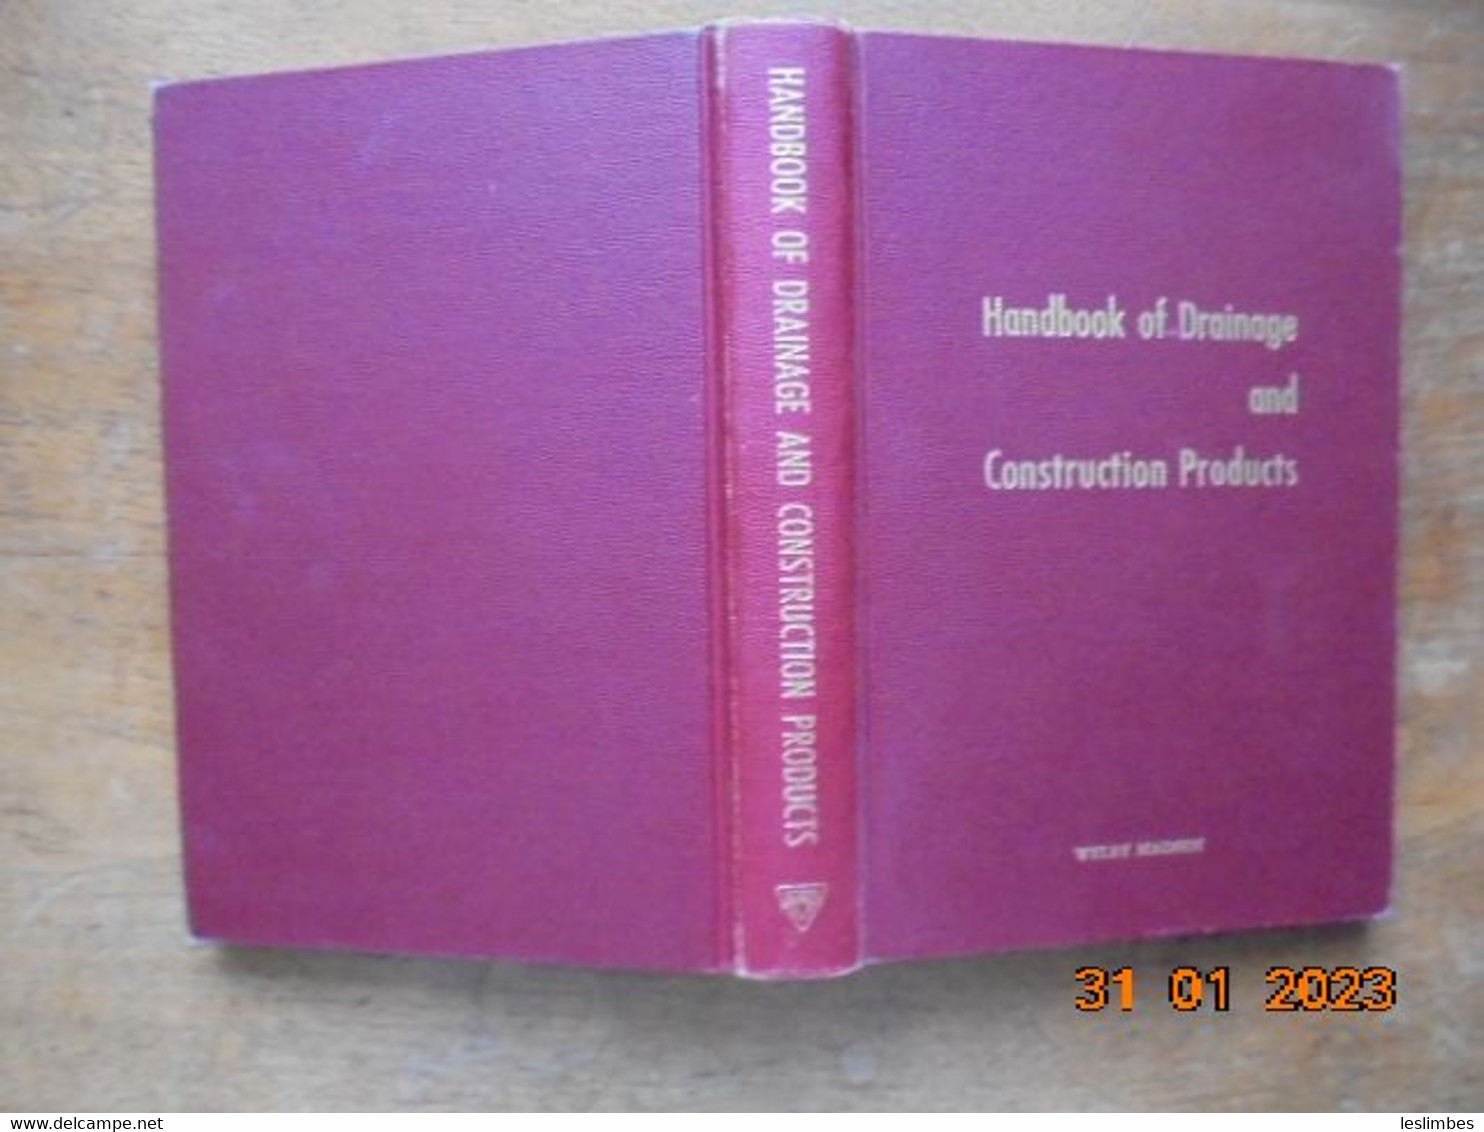 Handbook Of Drainage And Construction Products - Armco Drainage & Metal Products 1955 - Ingénierie